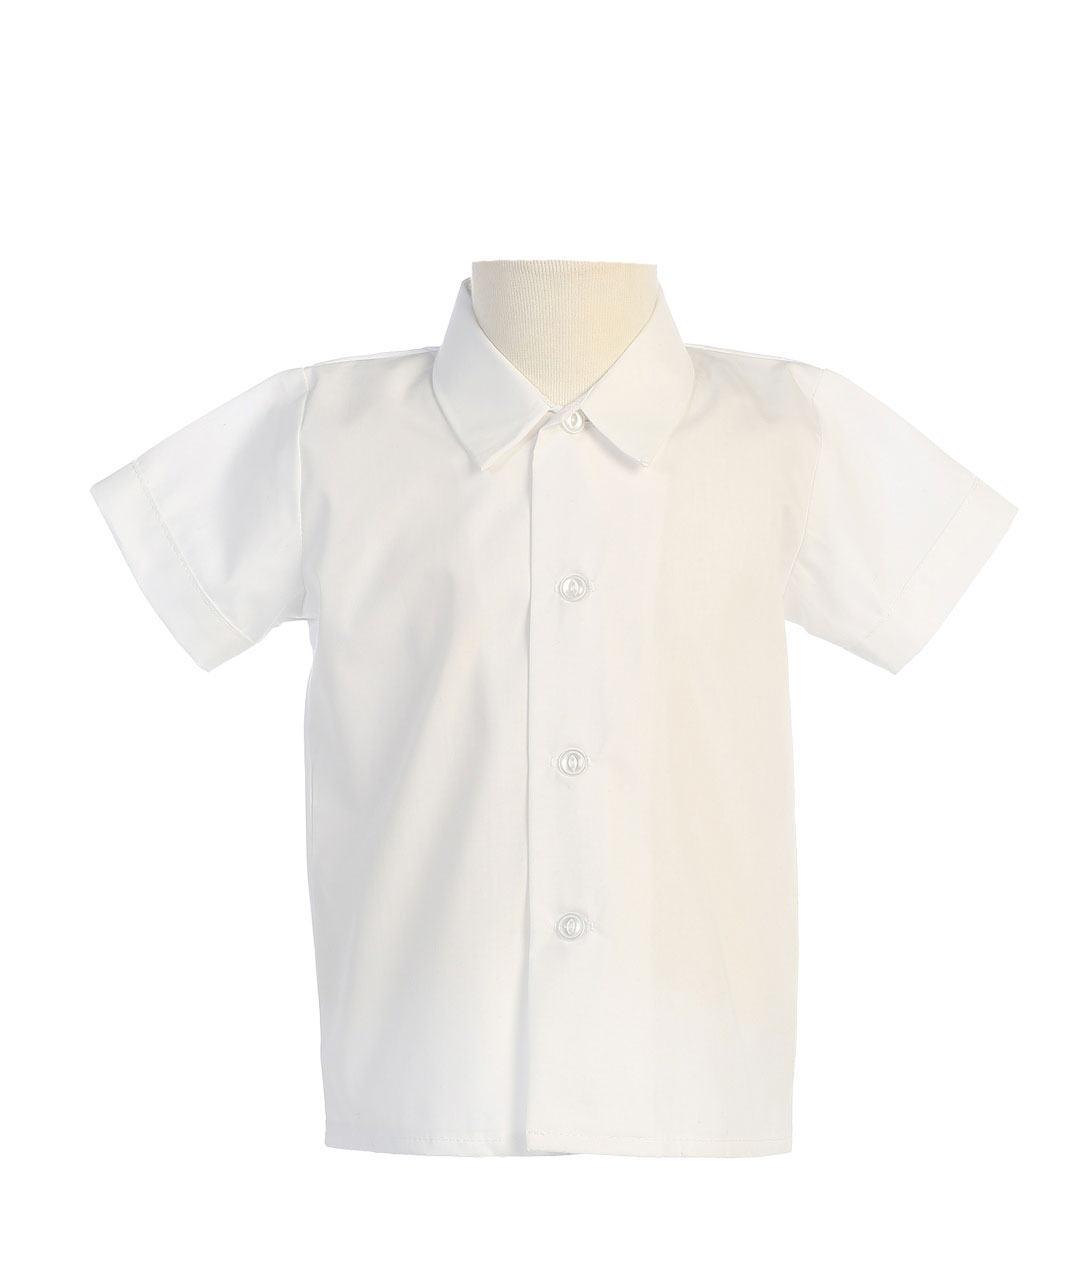 Boys Short Sleeved Simple Dress Shirt - Available in White 6